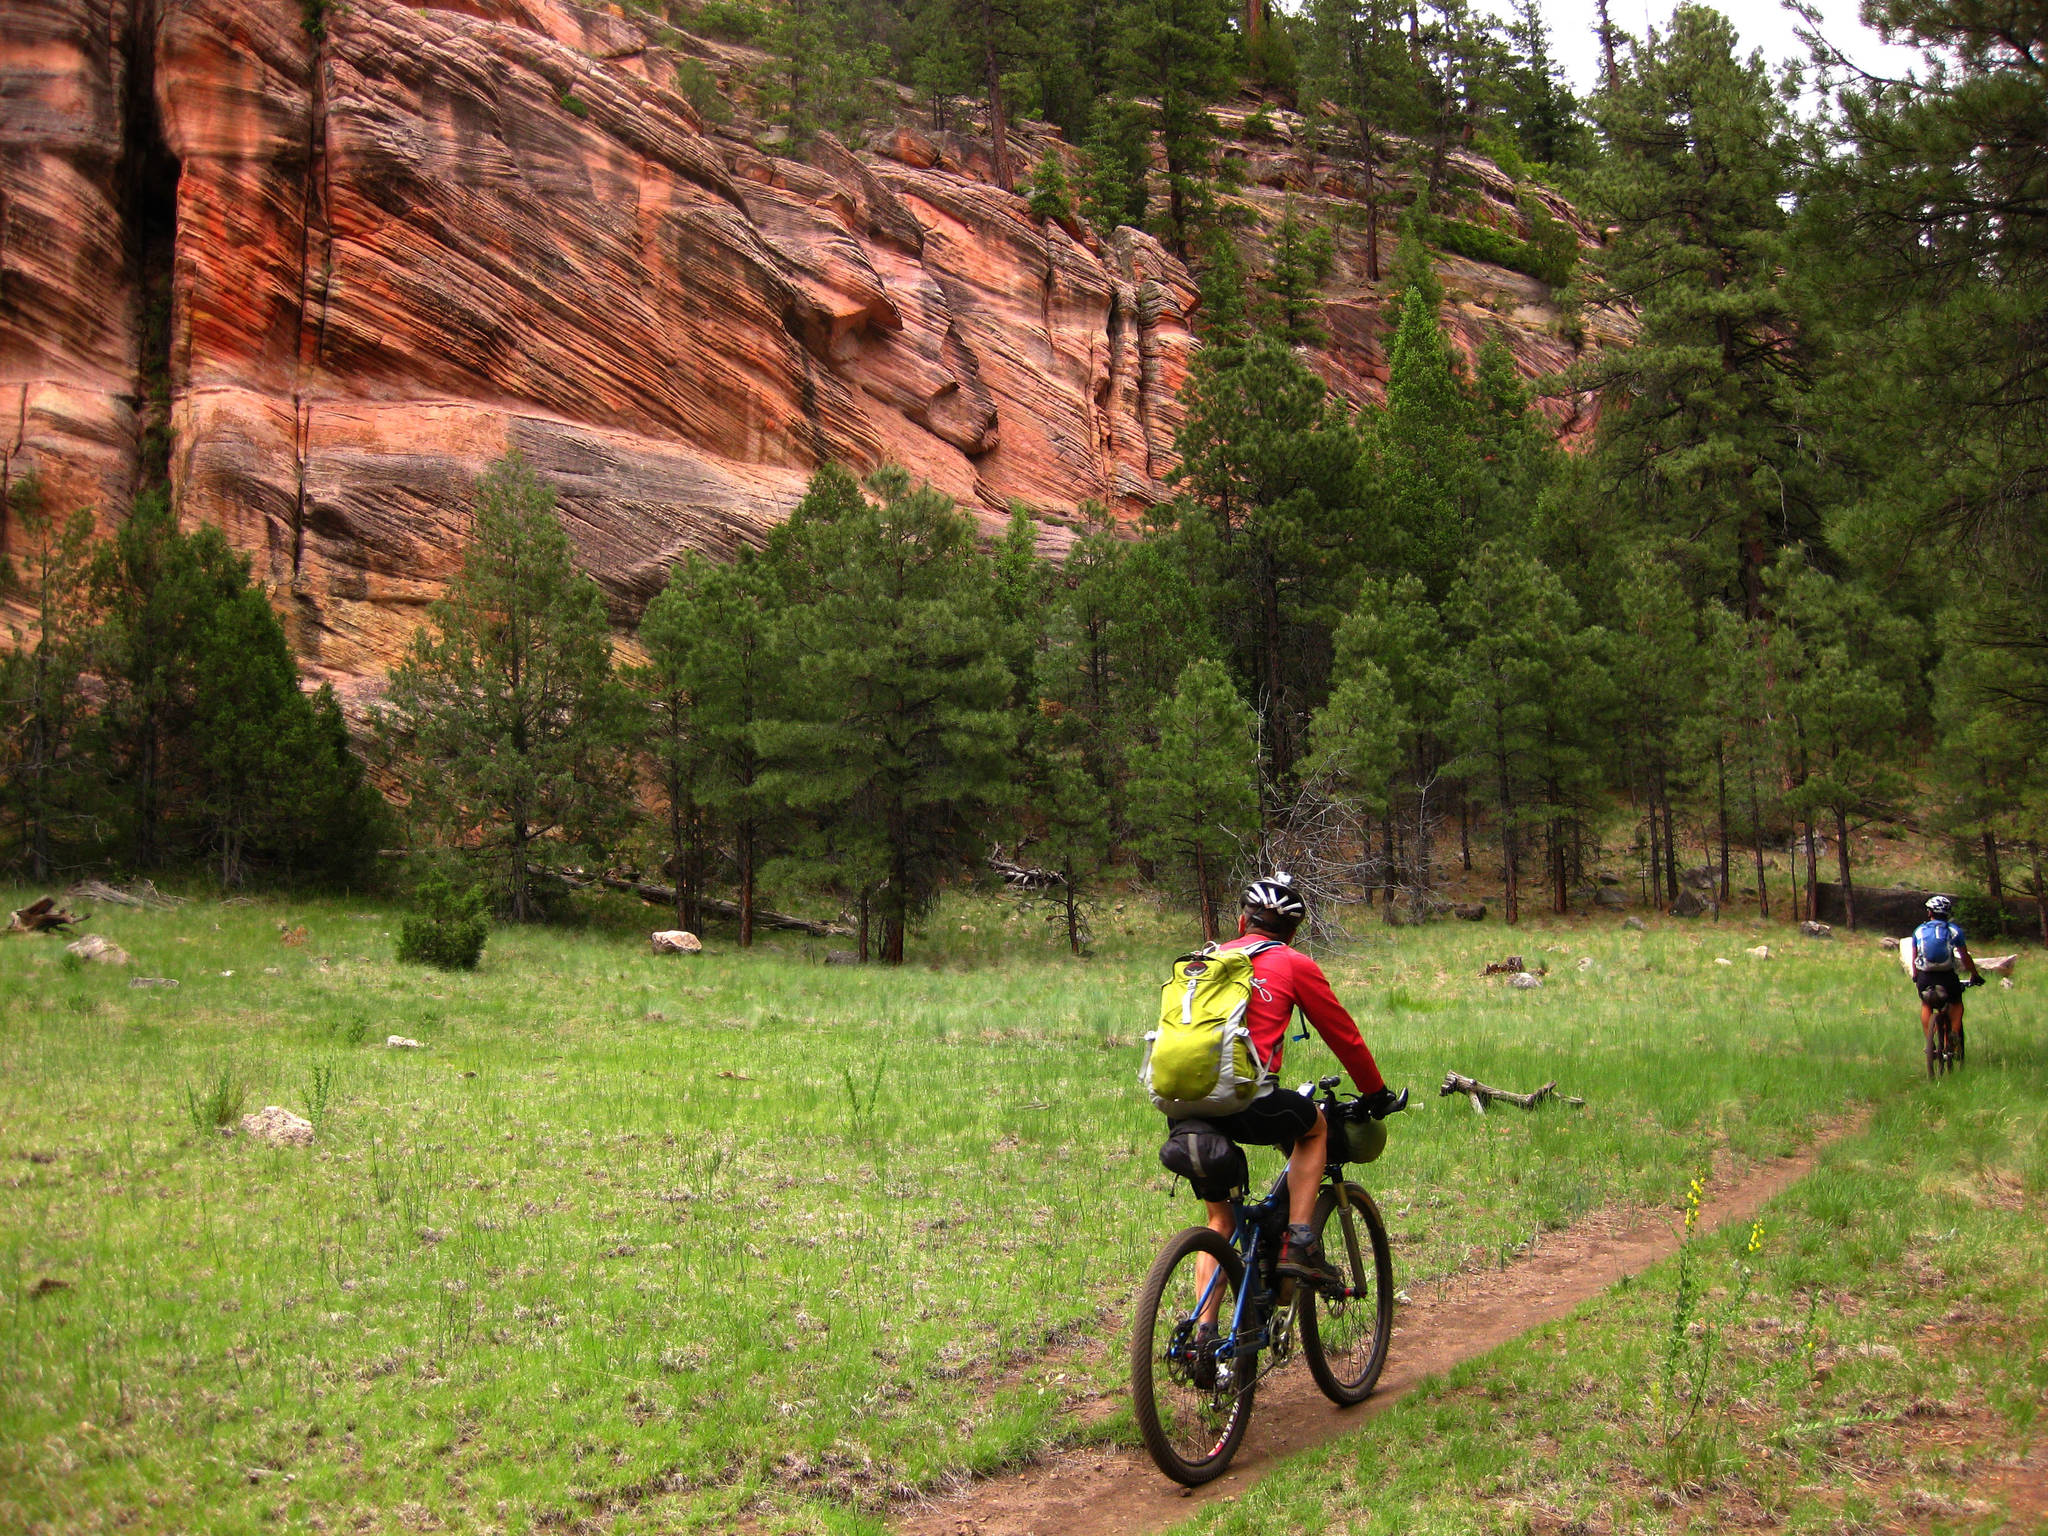 In this June 23, 2009 photo provided by Scott Morris, Lee Blackwell and Chad Brown are shown bikepacking a segment of the Arizona Trail, south of Flagstaff, Ariz. (Scott Morris via AP)